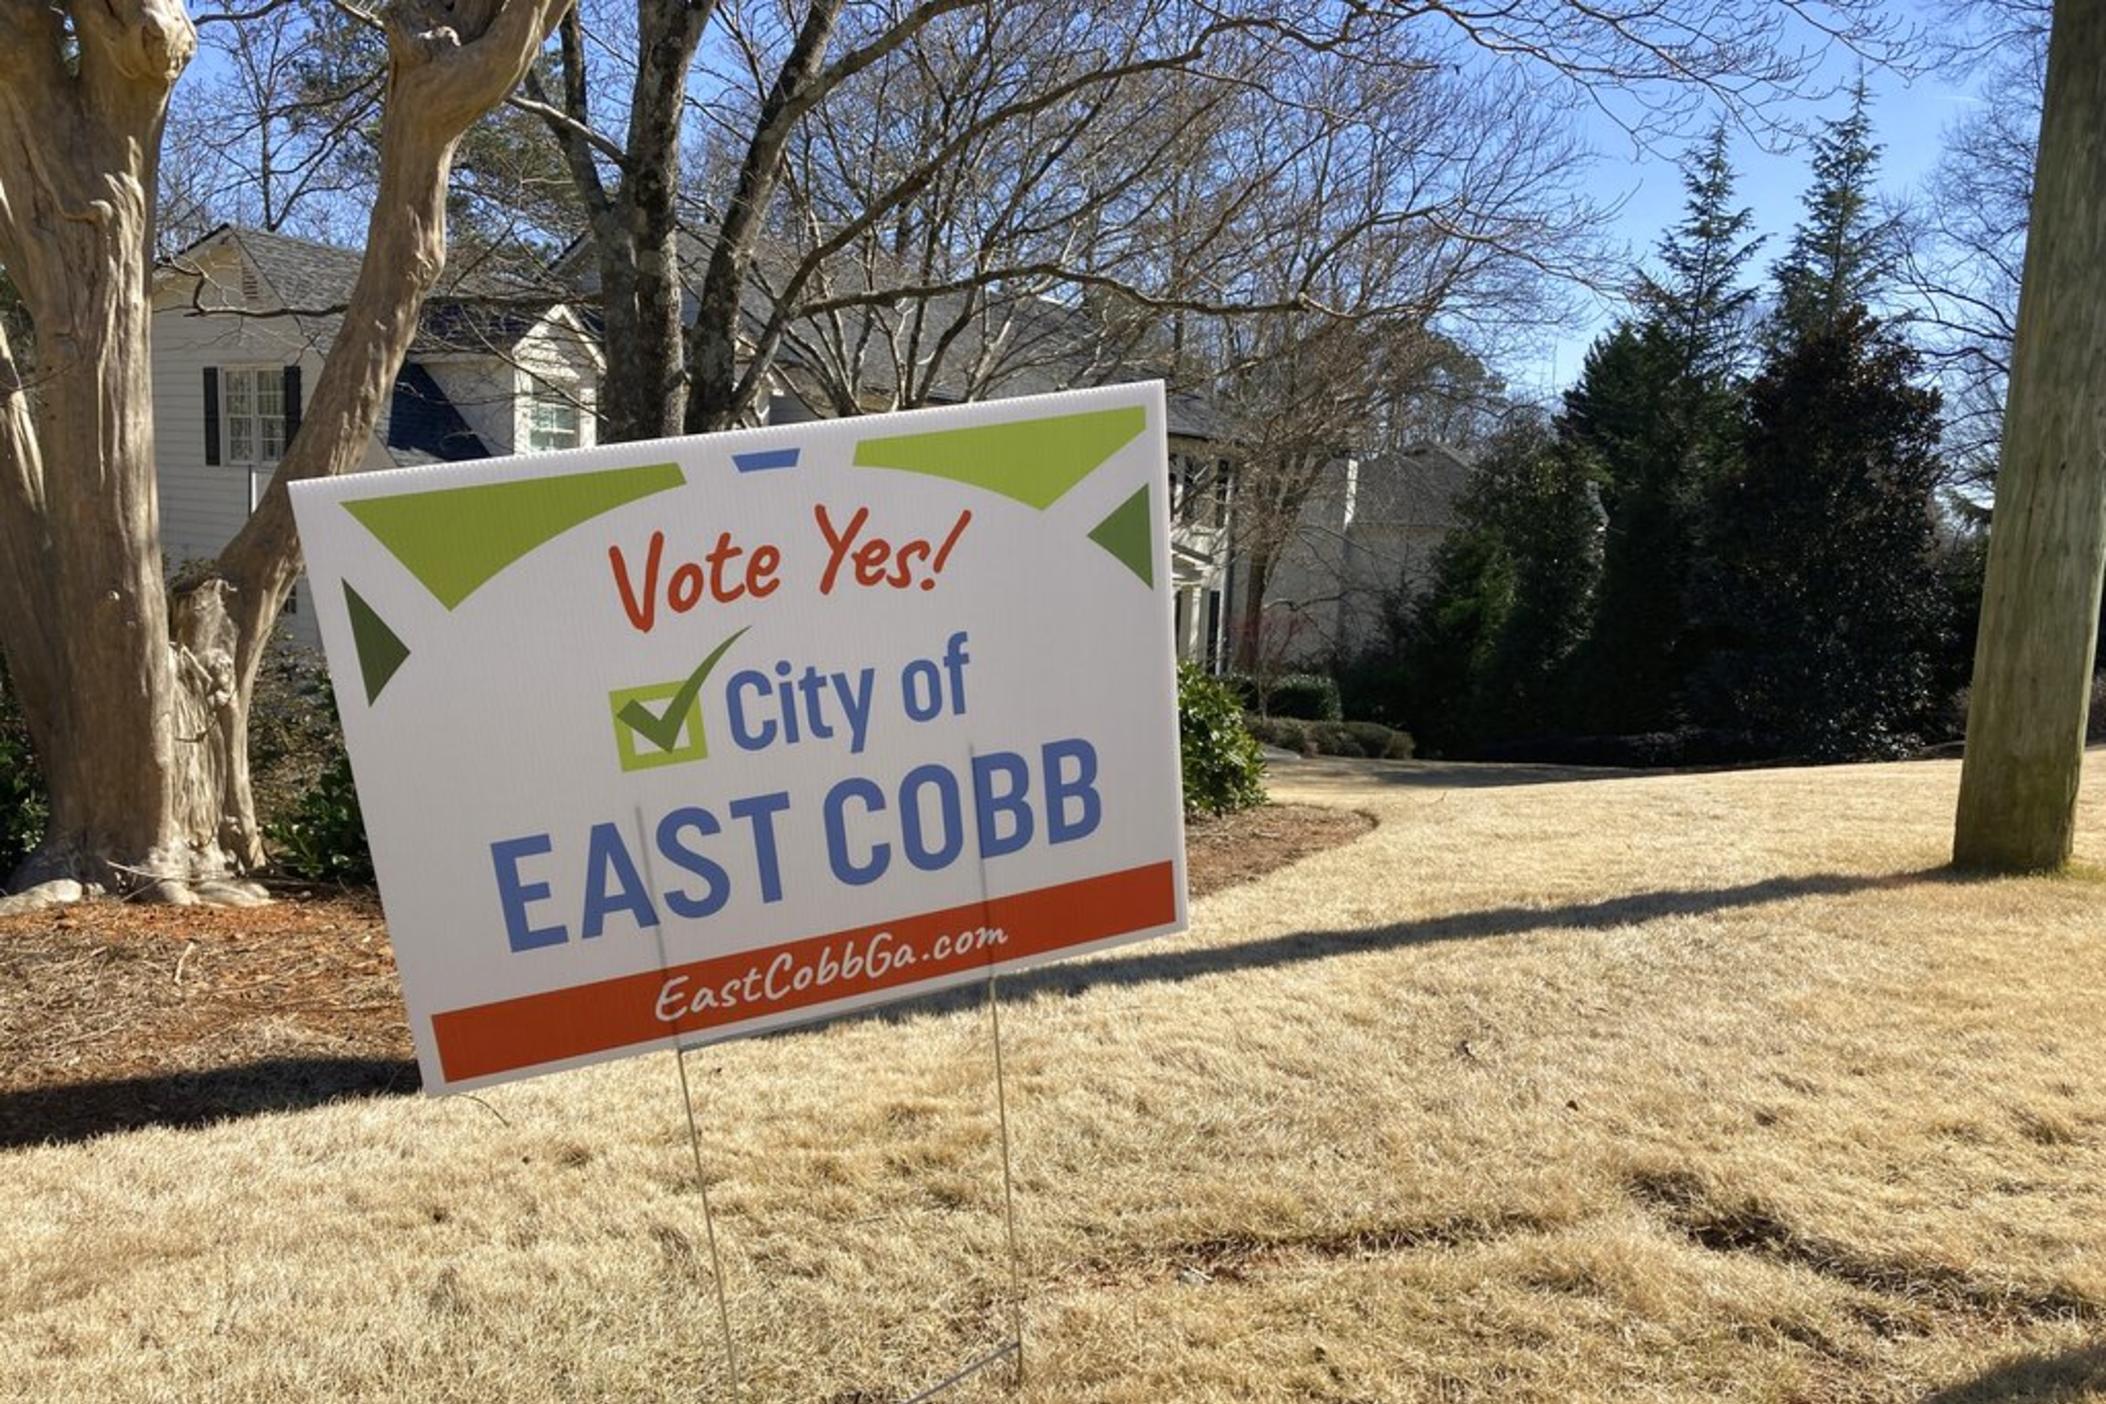 A sign in the ground outside a home in Cobb County on Feb. 14, 2022 encourages residents to vote in favor of creating the city of East Cobb. It's one of three cityhood referendums coming up in May in Cobb County that follow the election of three Black women to the county commission in the 2020 election, giving Democrats a majority on the commission for the first time in decades.